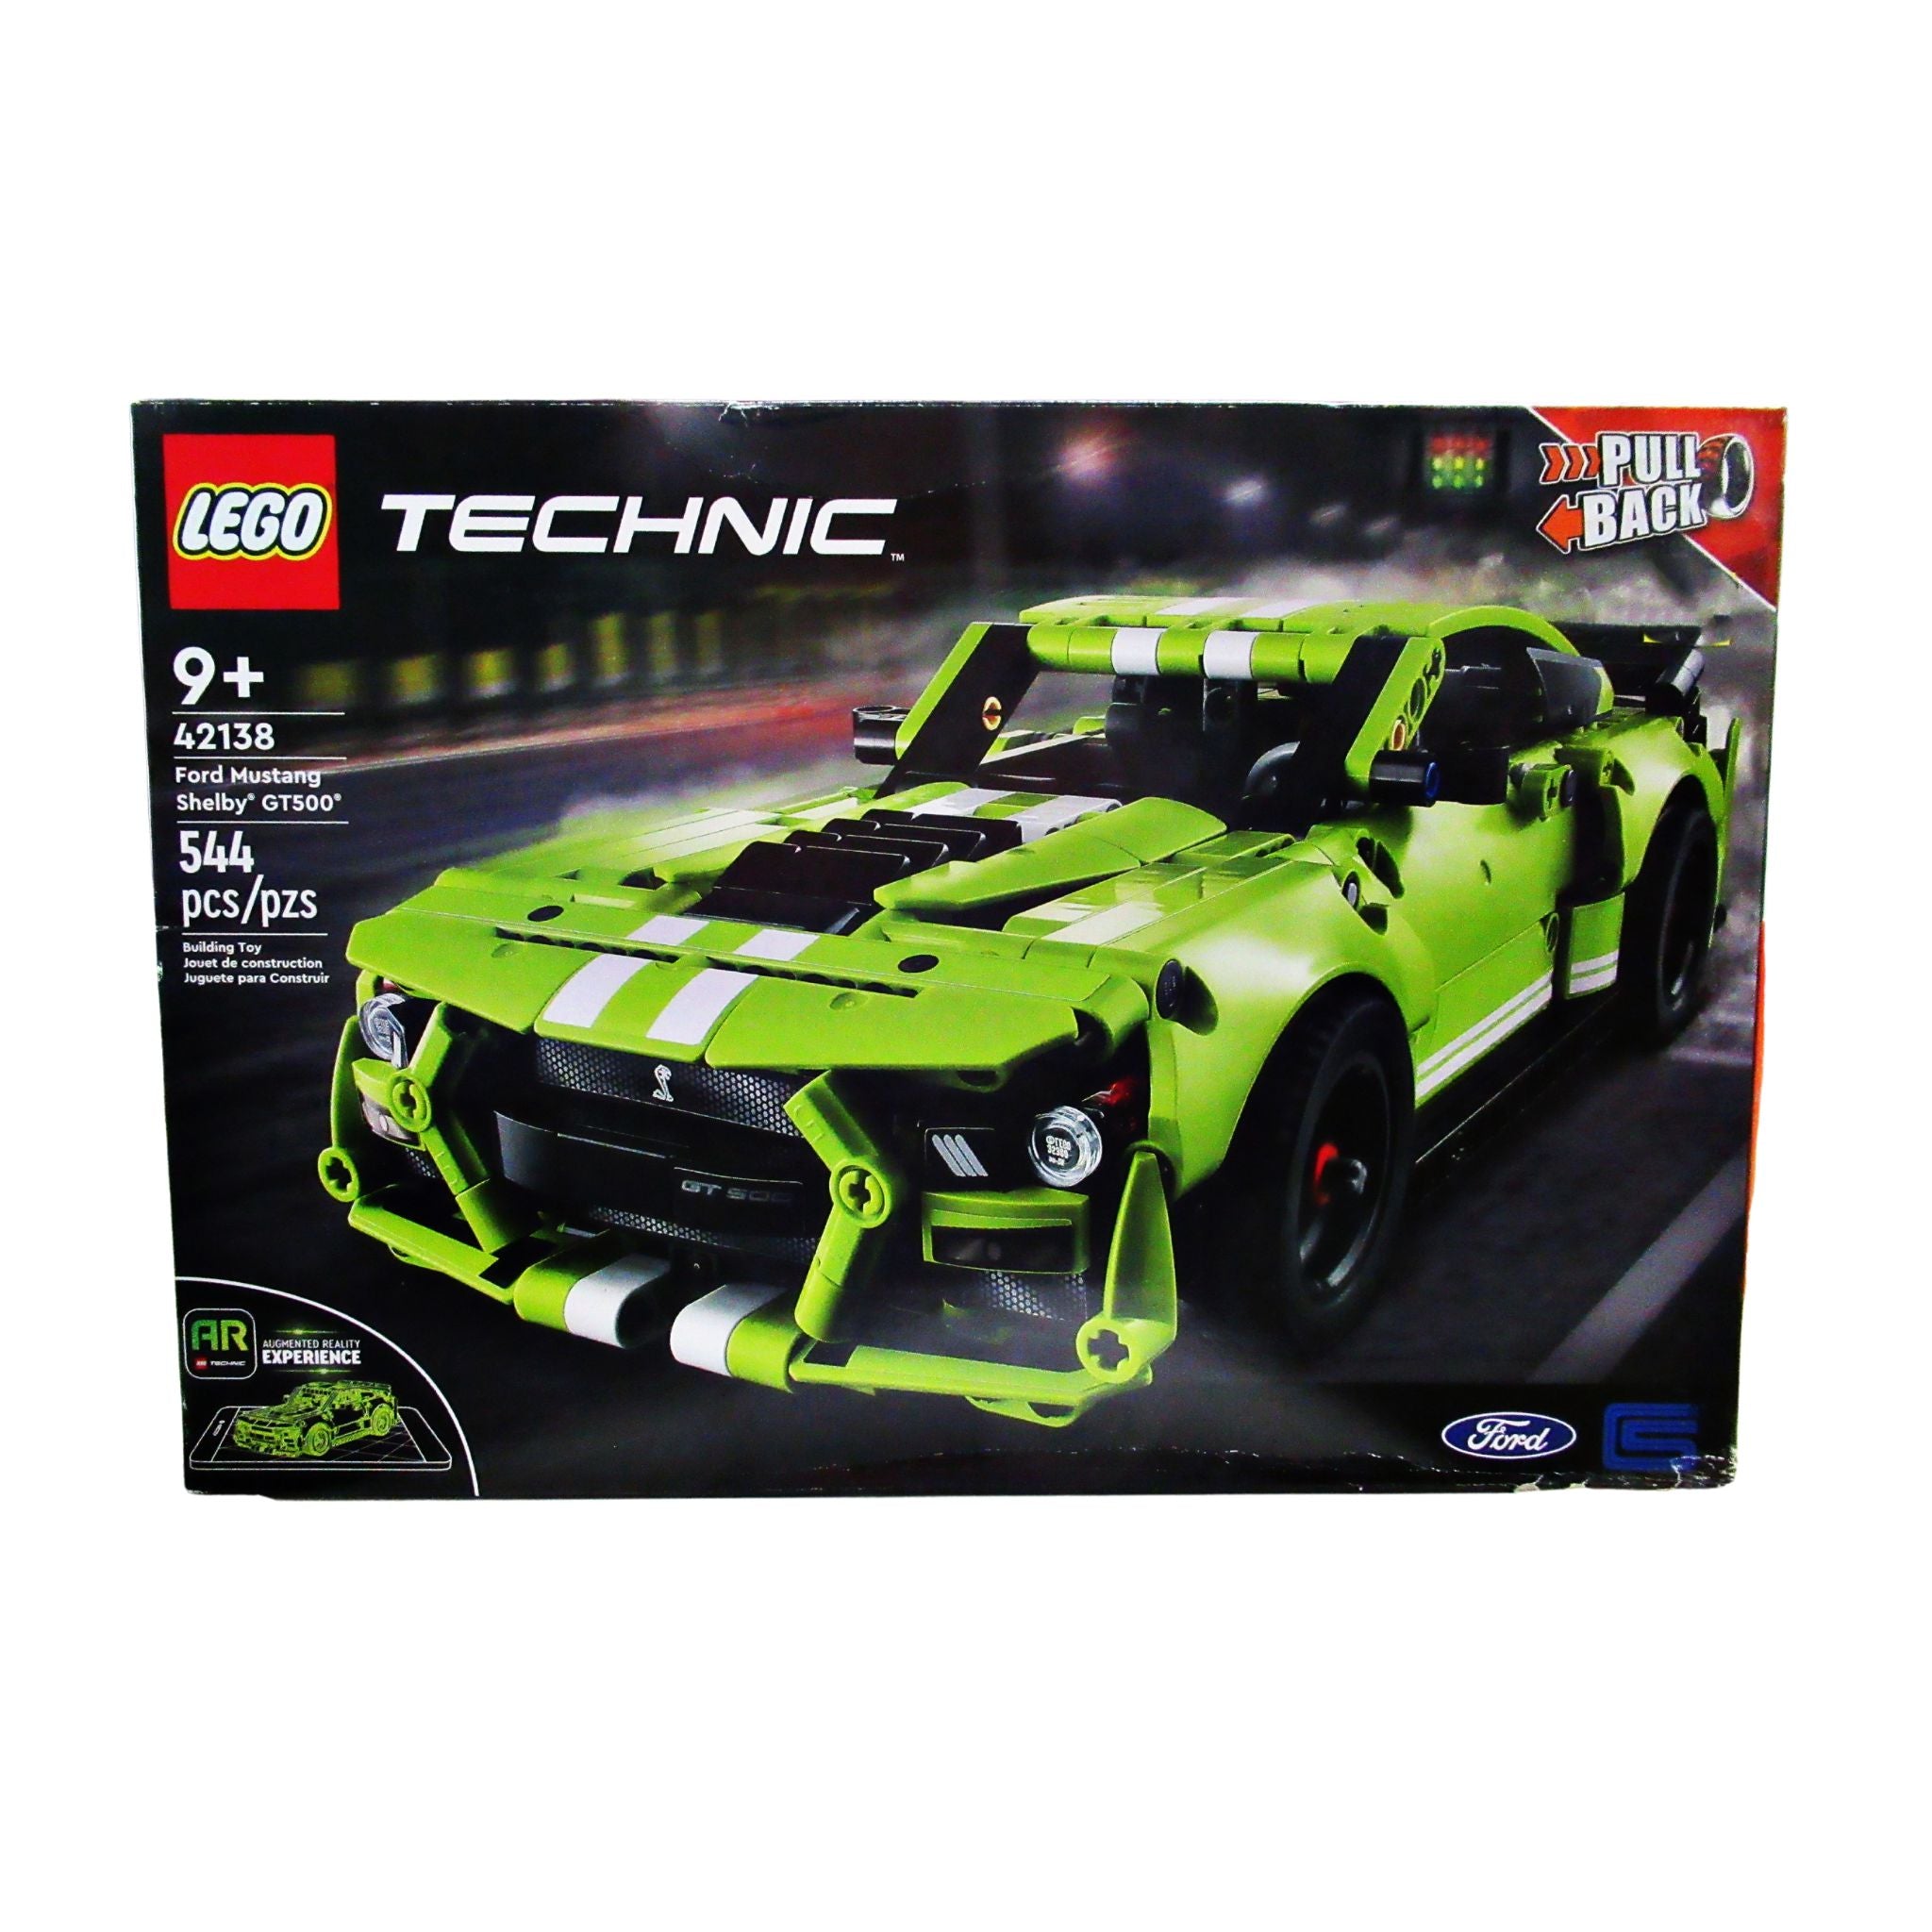 LEGO Technic Ford Mustang Shelby GT500 42138 9+ – Liquidation Nation